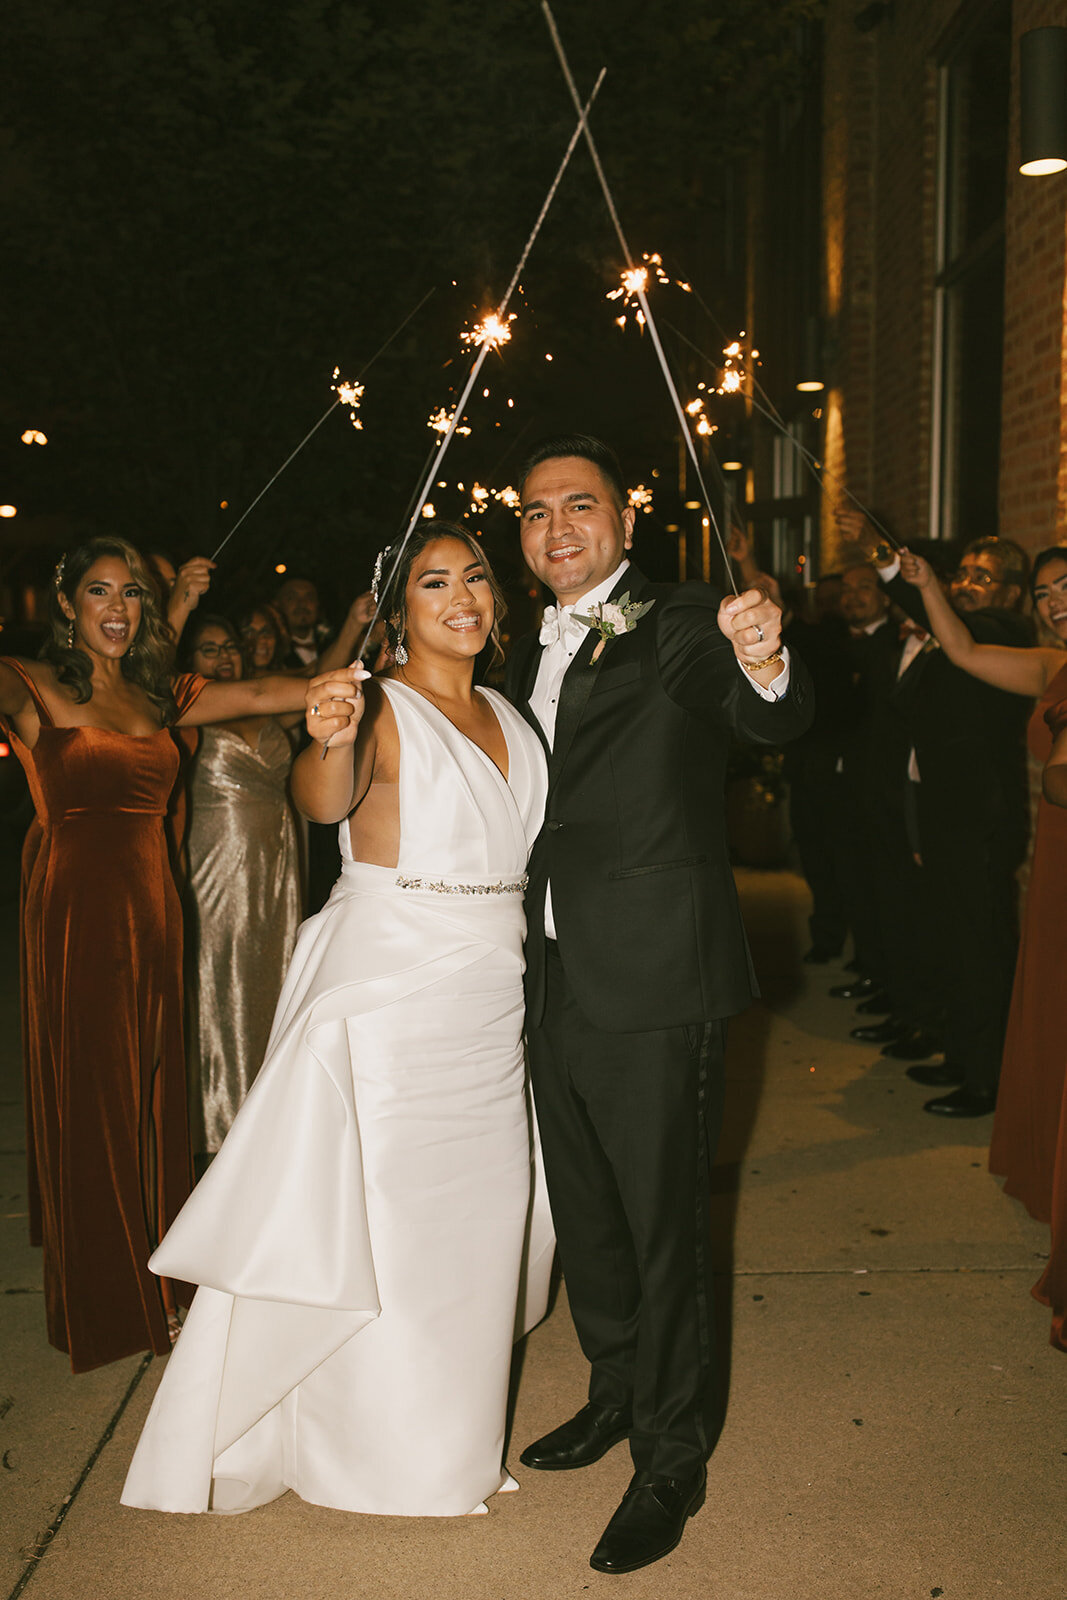 Newlywed bride and groom smile at the  camera and hold sparklers after Loft on Lake wedding reception.